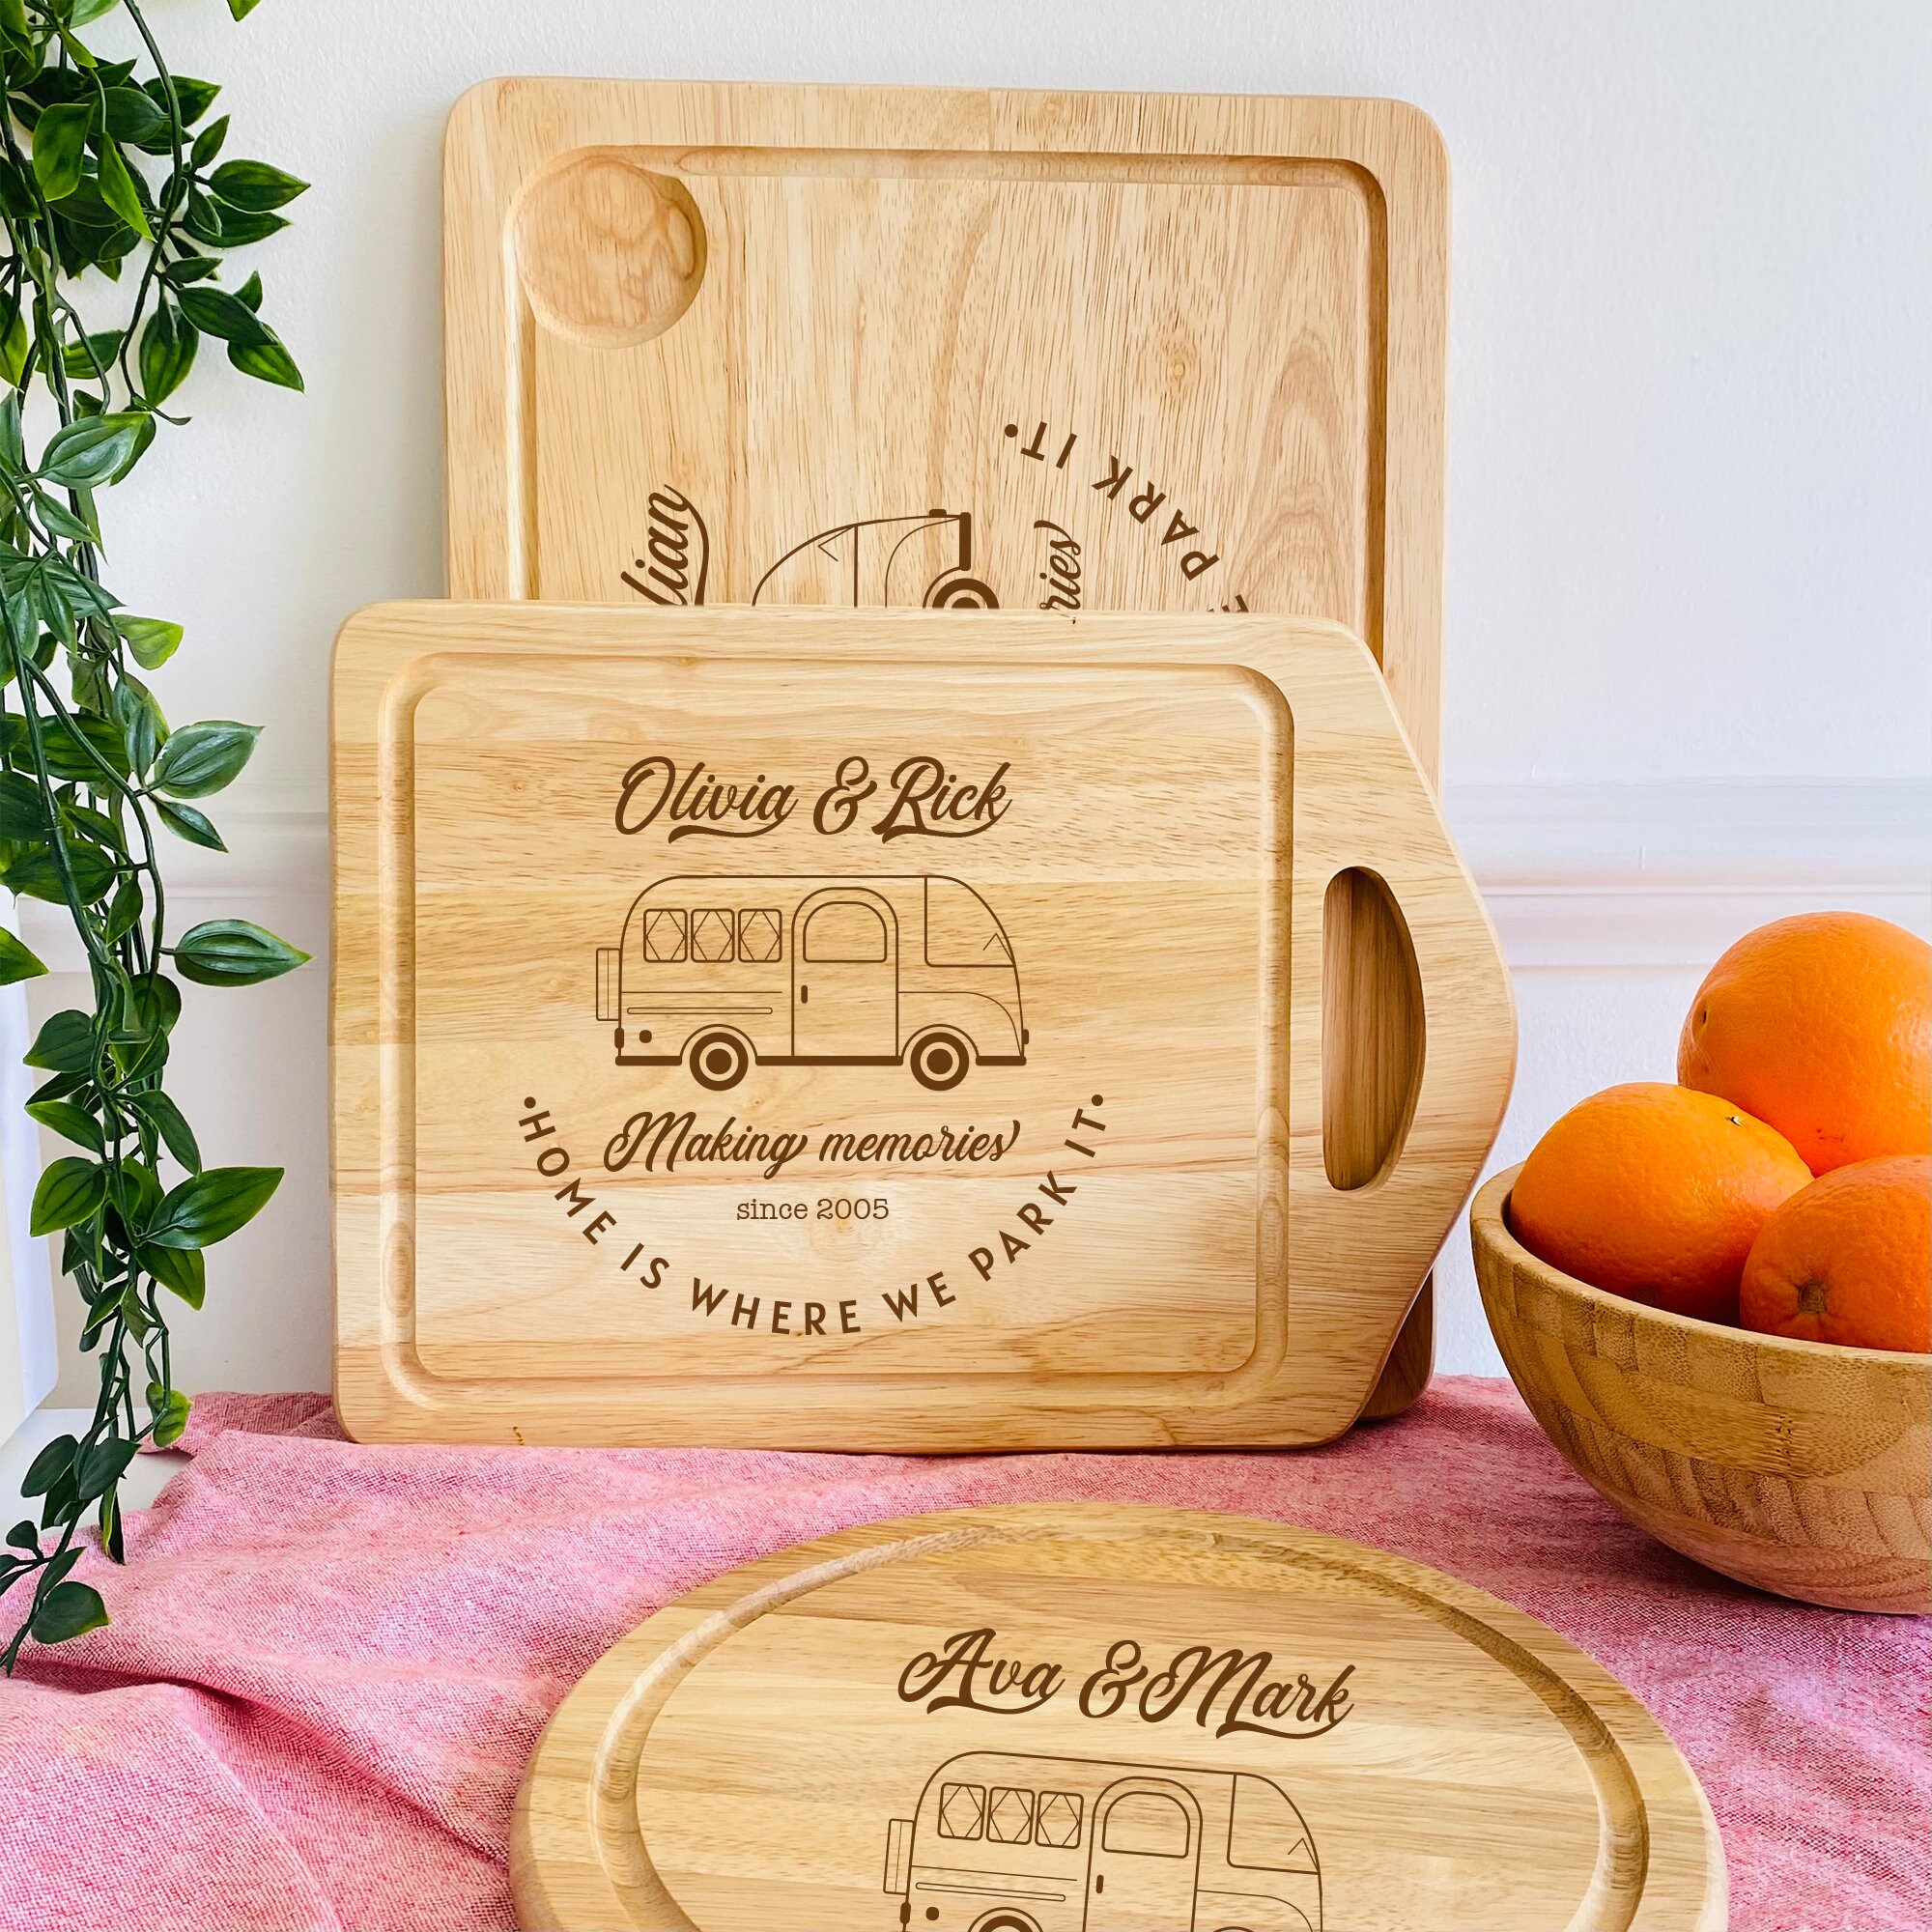 Happy Camper Bamboo Cutting Board,Retro RV Engraved Camping Cutting Board,  Camper Decor RV Gift for Couple,Camping,Housewarming&Party Small